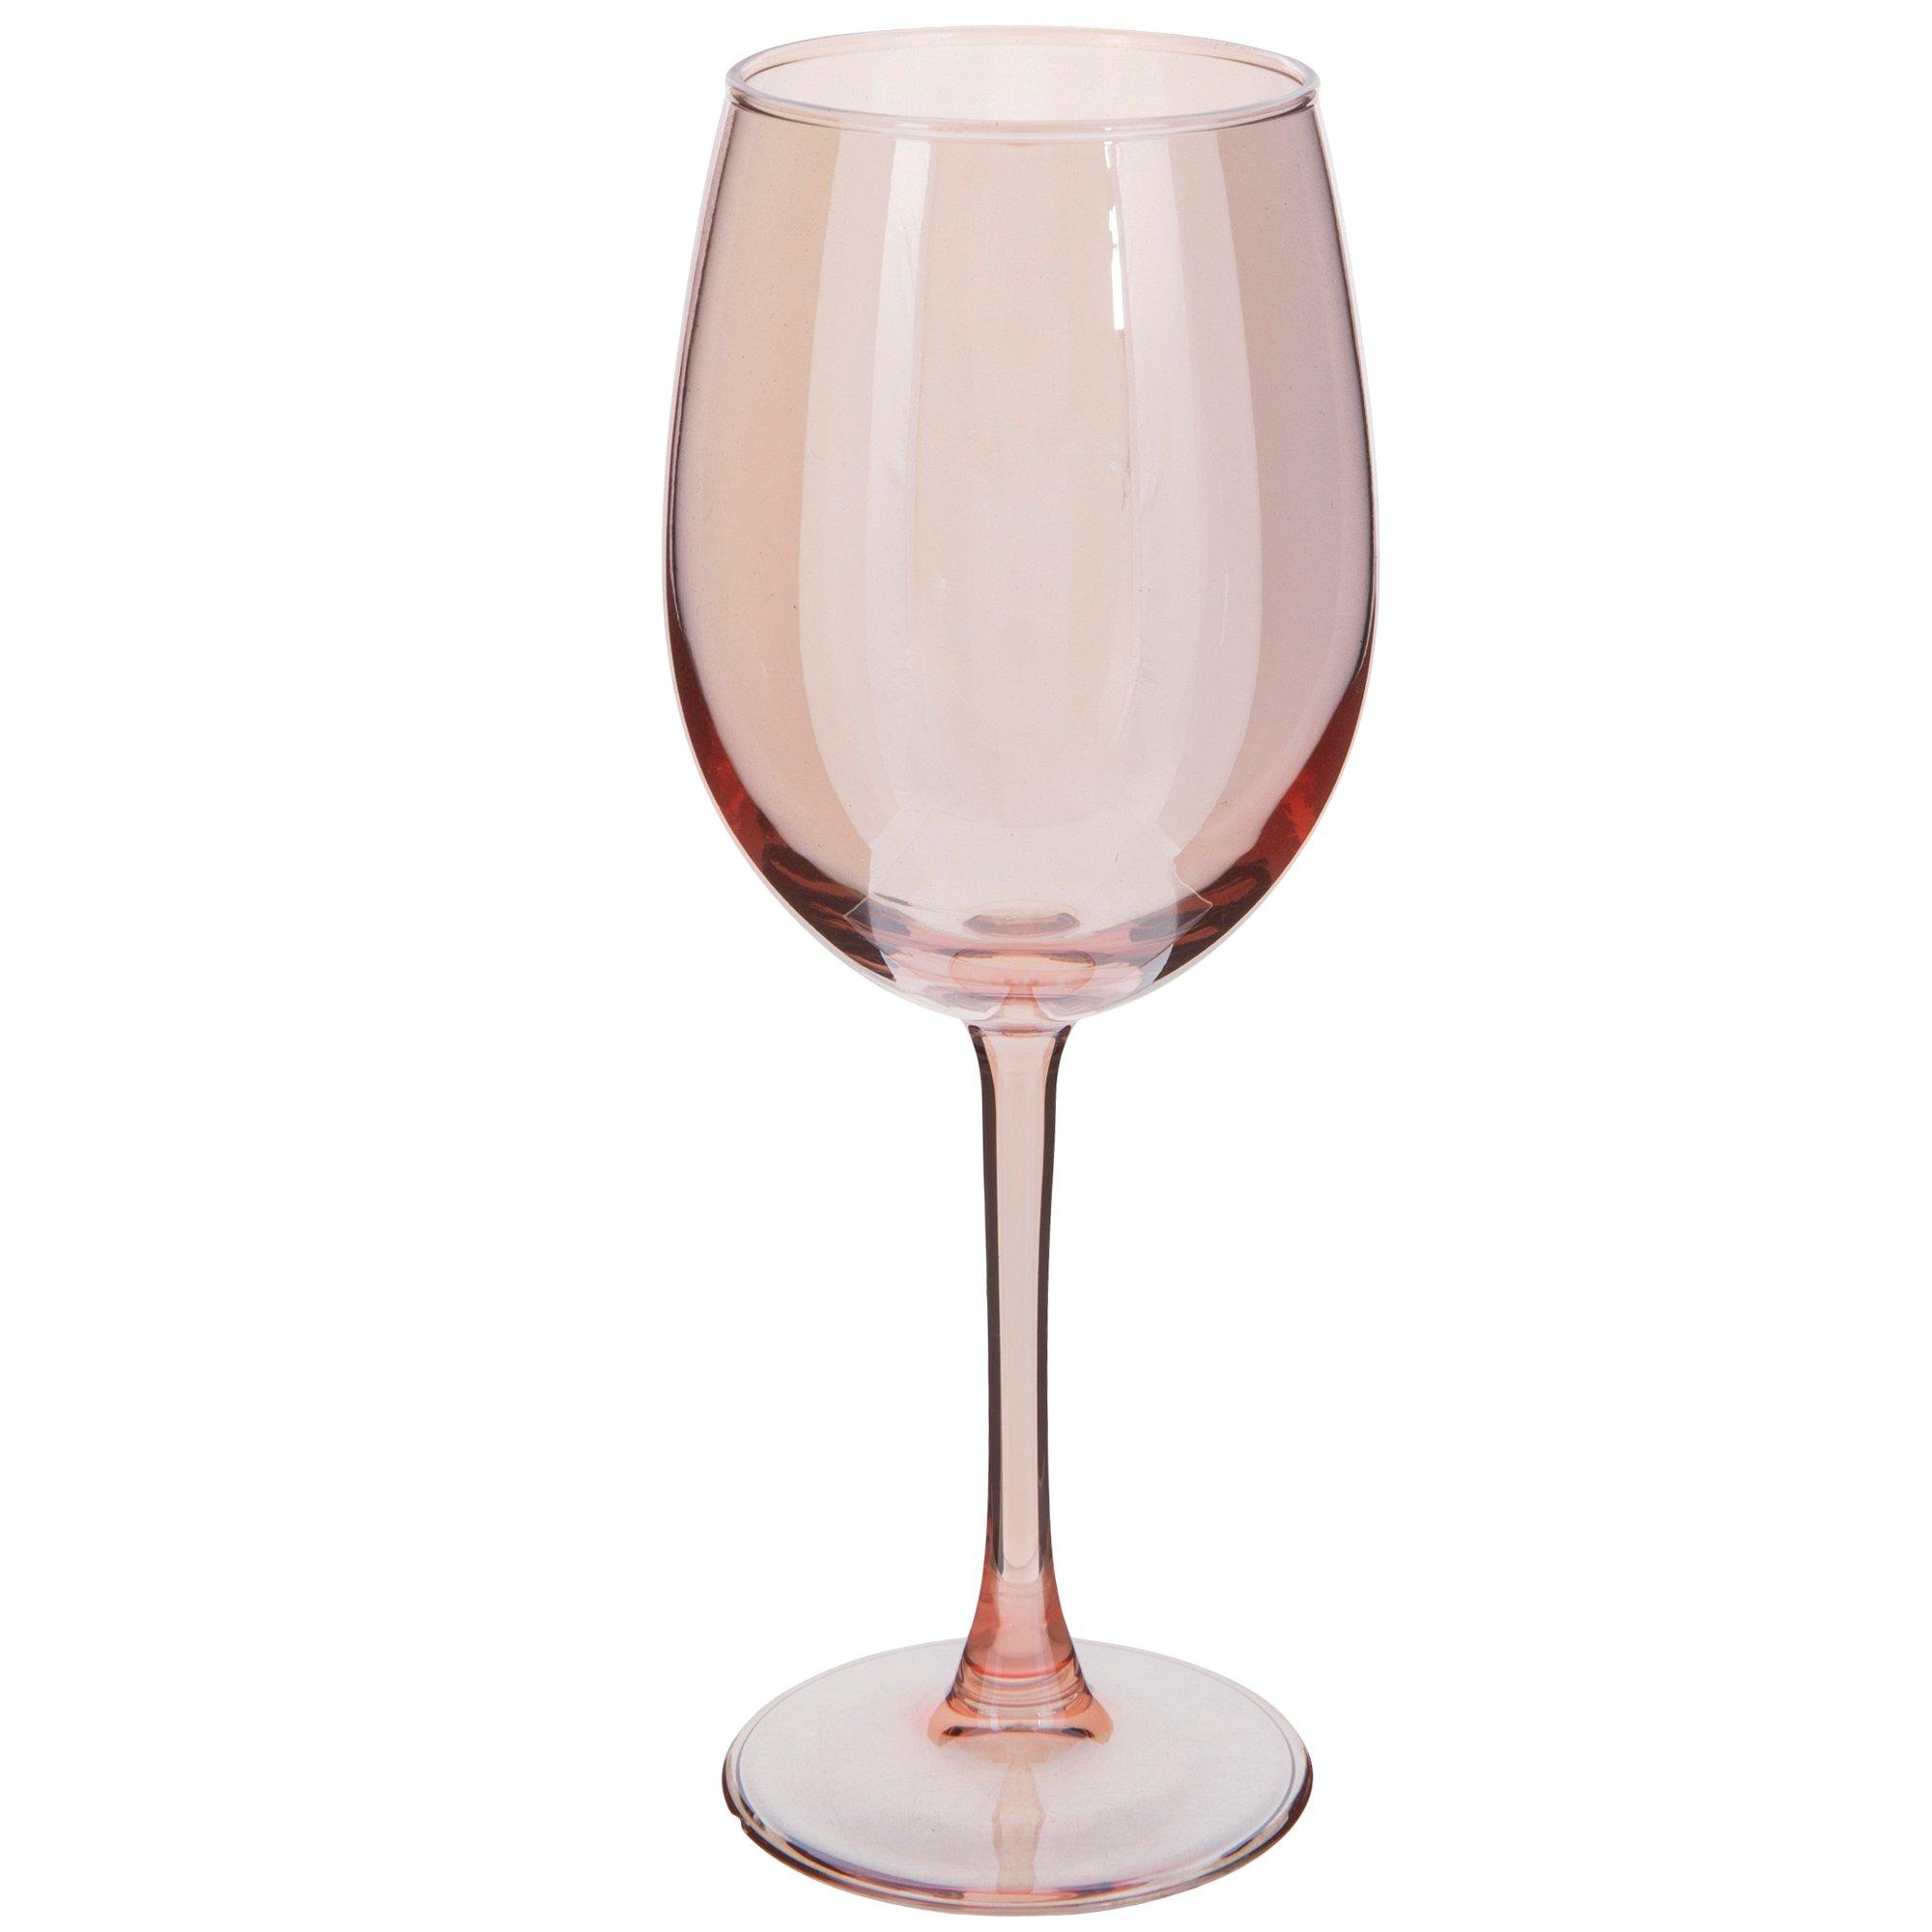 RAKLE Stemless Wine Glasses – Set of 4 Red Colored